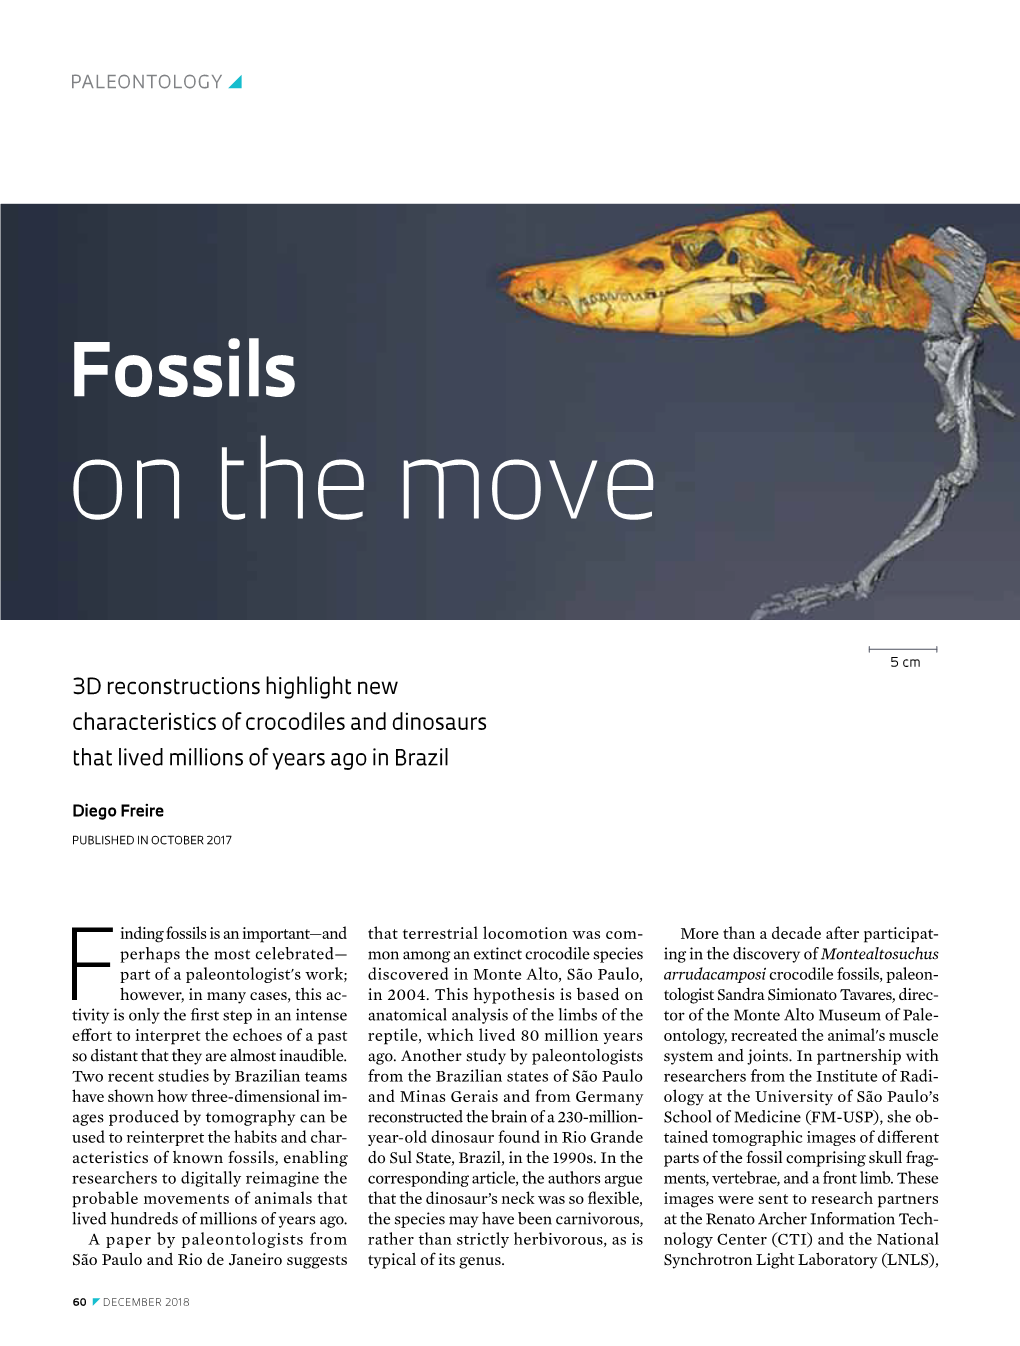 Fossils on the Move